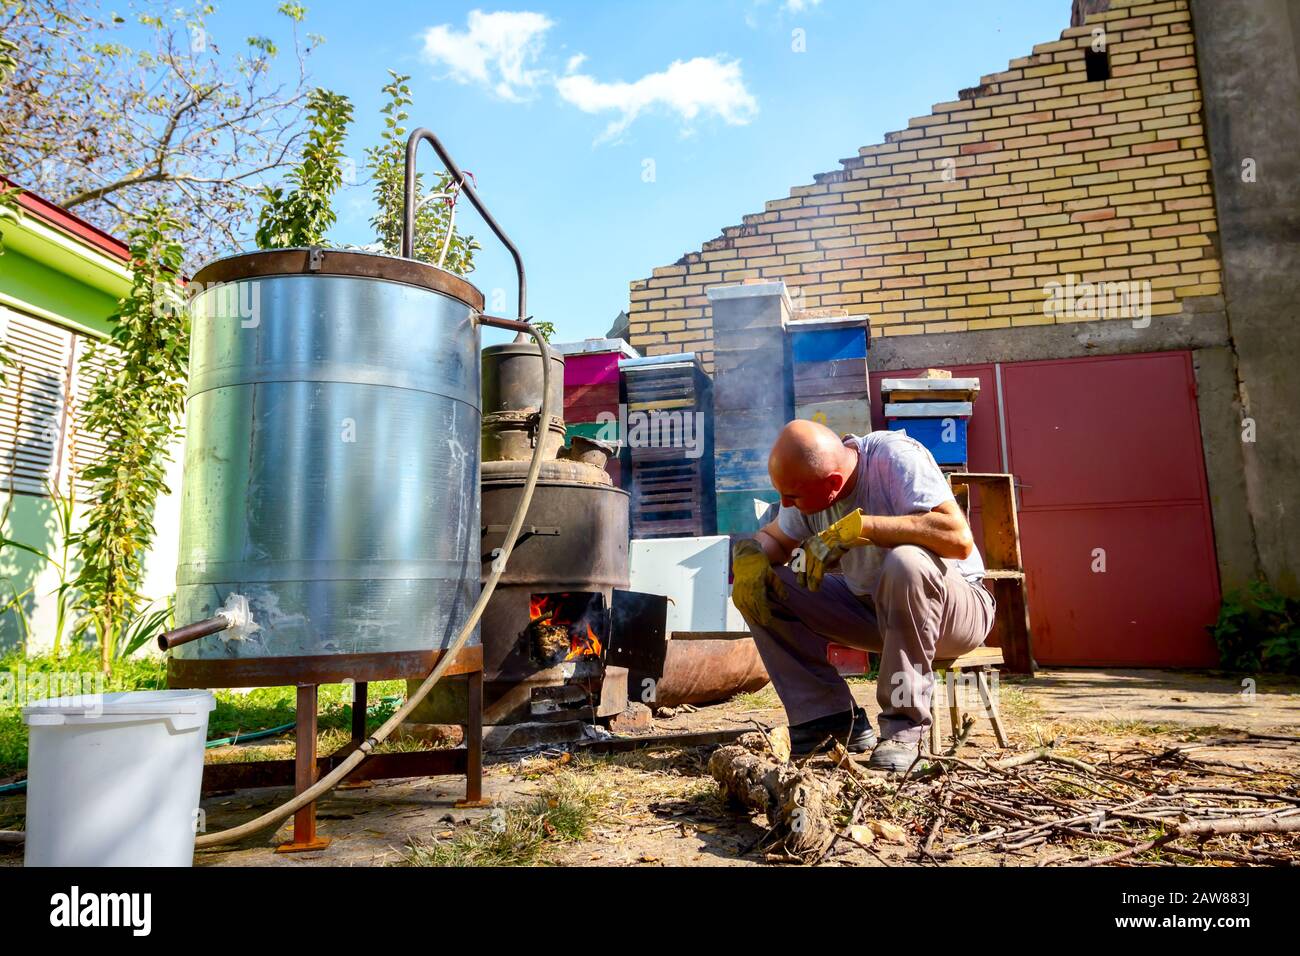 Man throws dry branches into the firebox of a homemade distillery making moonshine schnapps, alcoholic beverages. Stock Photo